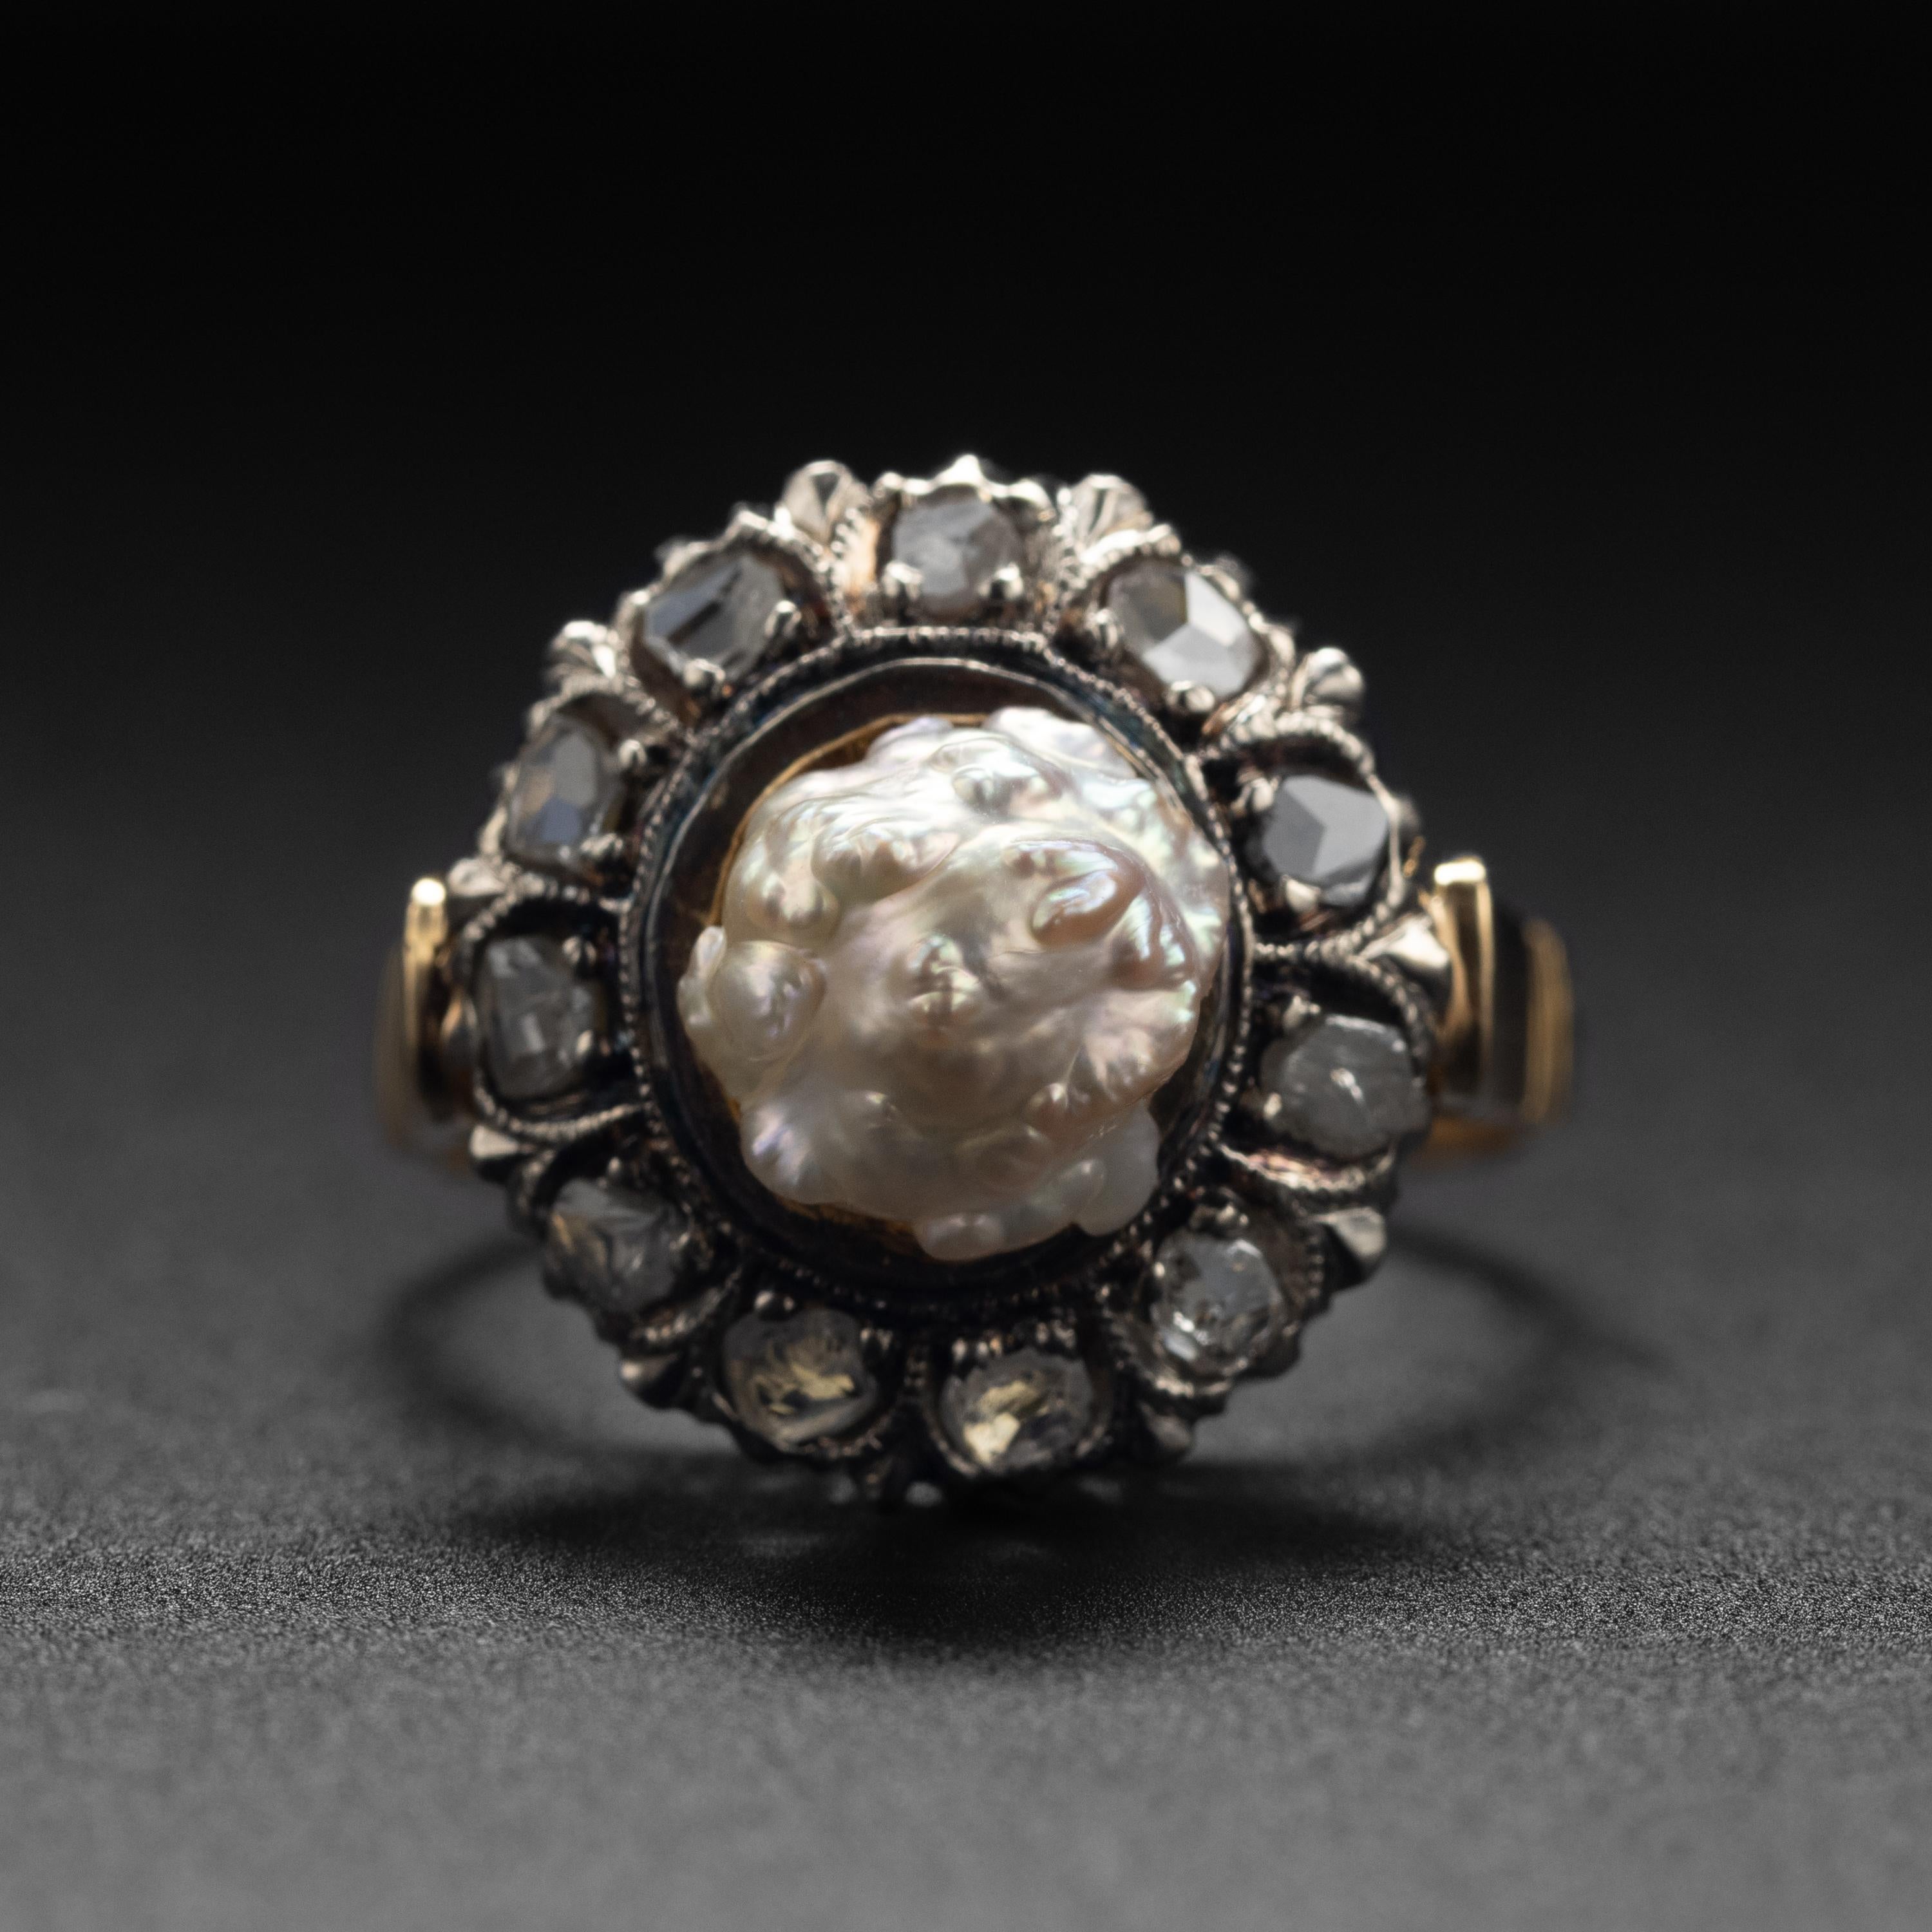 Eleven rocky old single-cut diamonds encircle a luminous, sculptural natural river pearl in this glorious ring from the 1880s. Crafted in 18K yellow gold topped with silver for the diamonds, this magnificent ring is as beautiful as it is unusual.